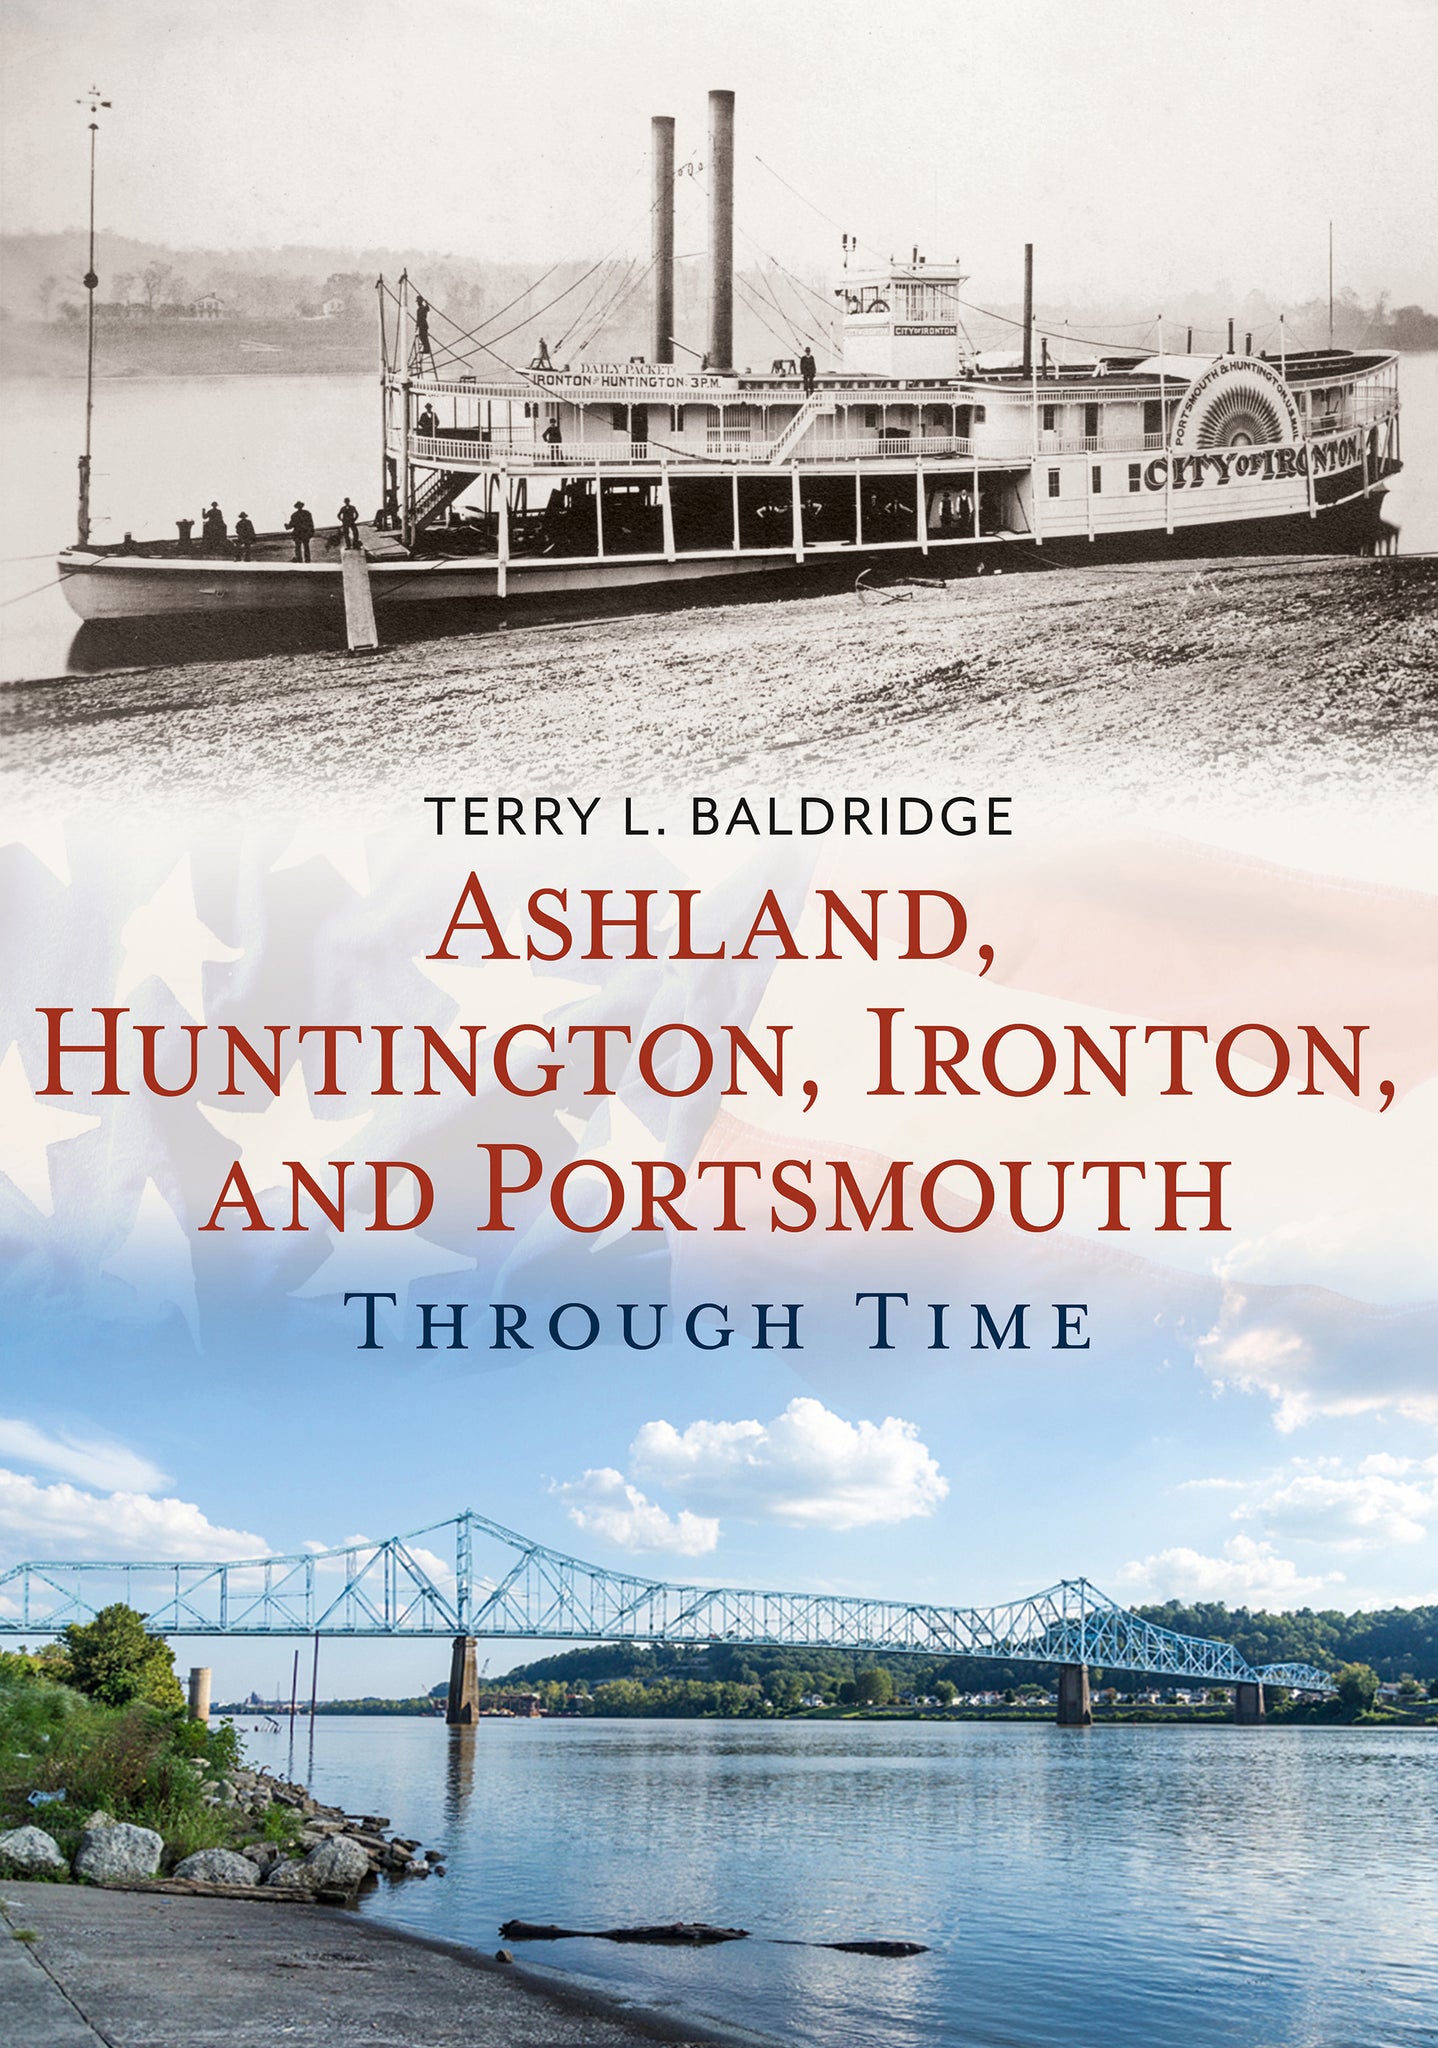 Ashland, Huntington, Ironton, and Portsmouth Through Time - available now from America Through Time